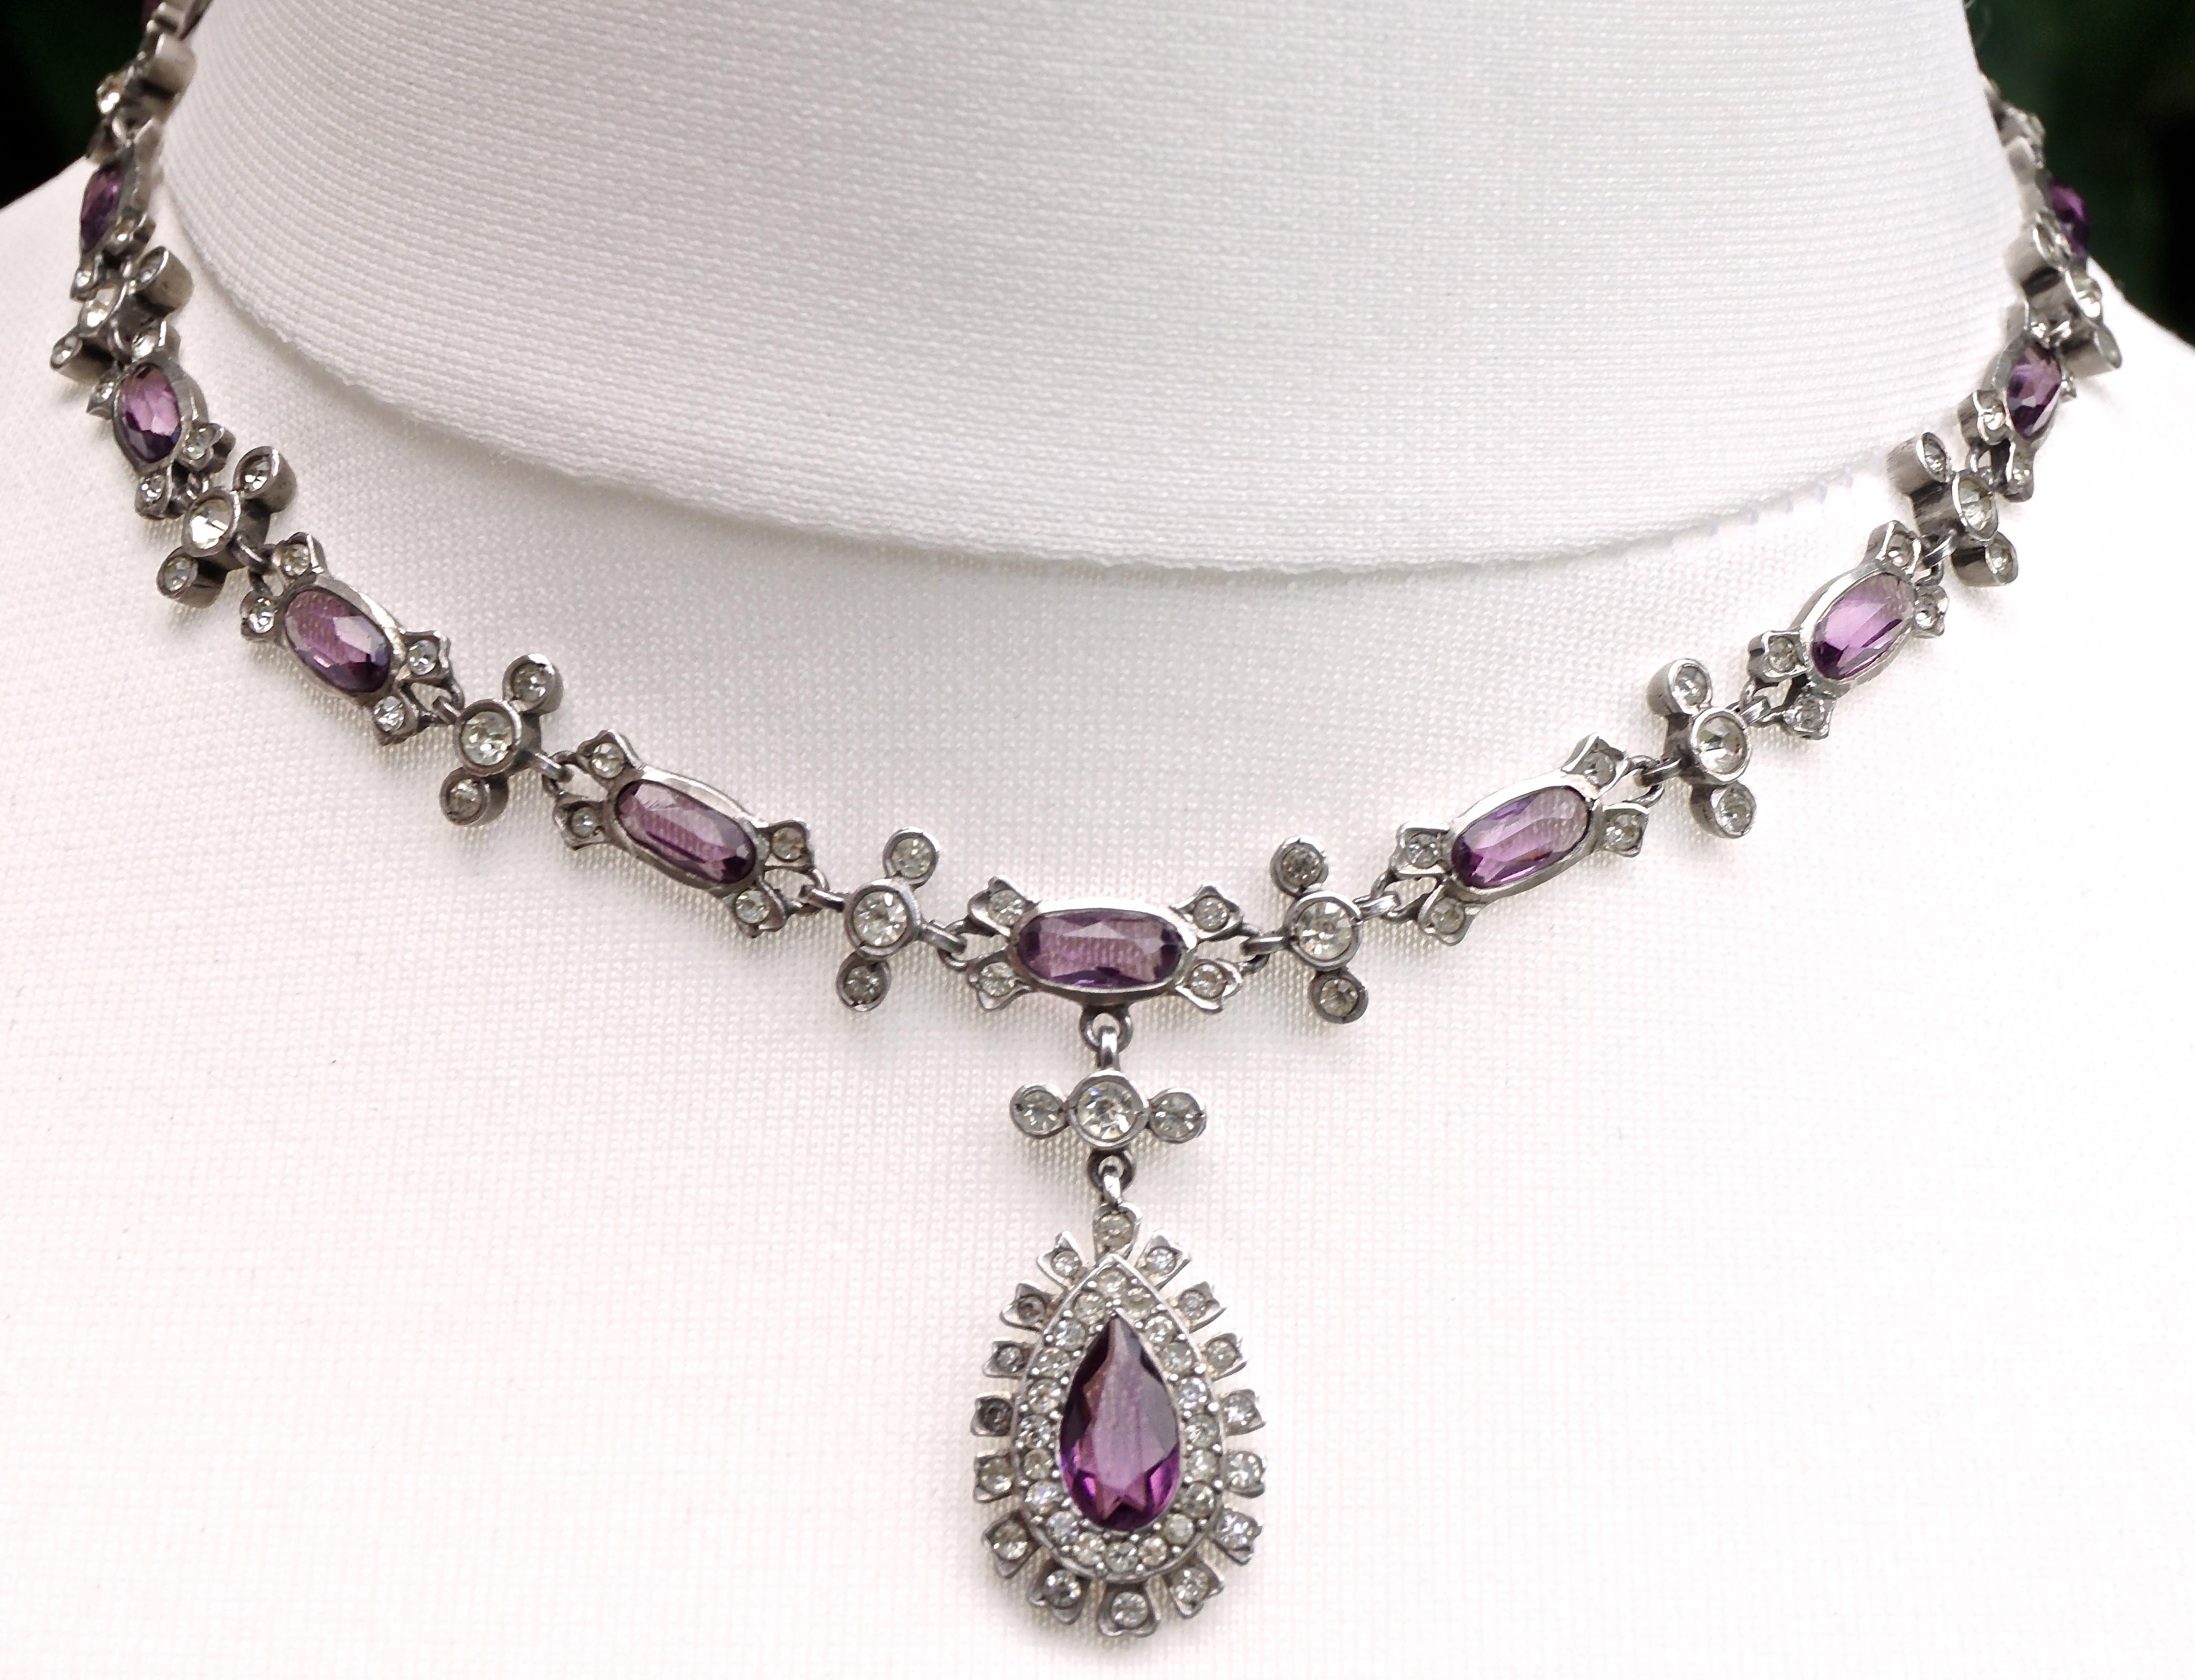 Beautiful antique sterling silver lavalier necklace with white and soft amethyst paste stones, stamped 'Sterling' on the reverse of the pendant. This necklace is of rather a grand design, imitating an amethyst and diamond necklace, and featuring a